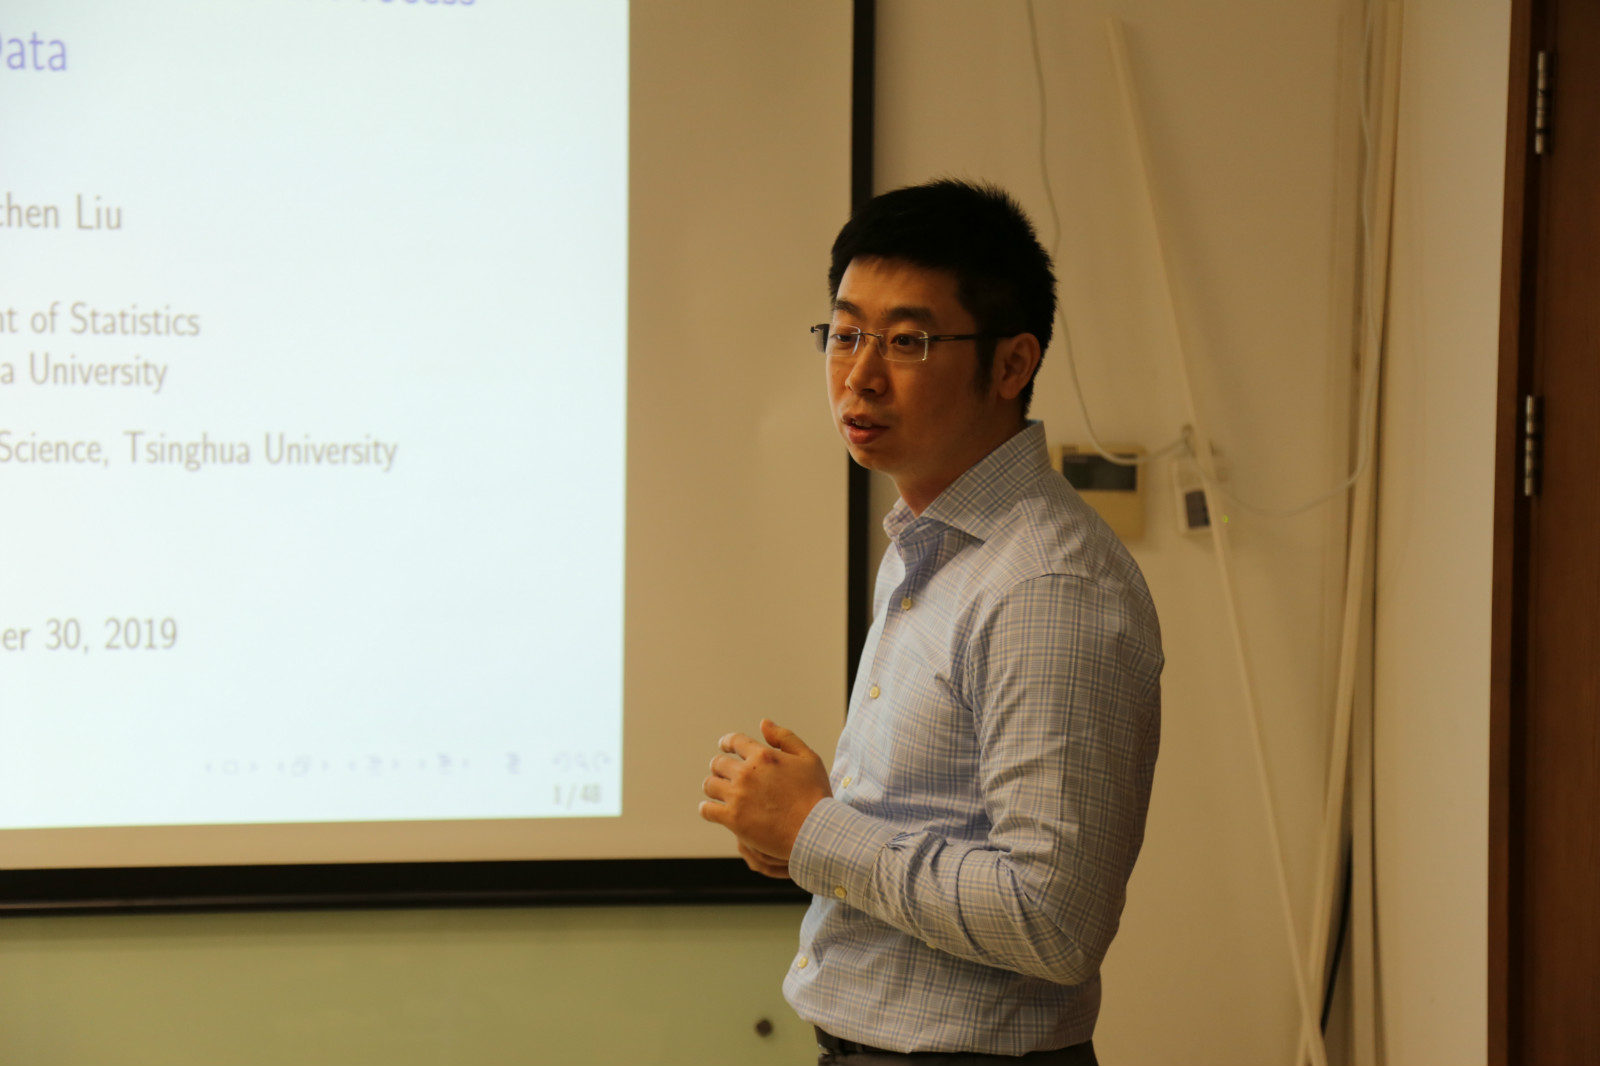 Pro. Jingchen Liu from Columbia University Visited Our Center and Gave a Talk